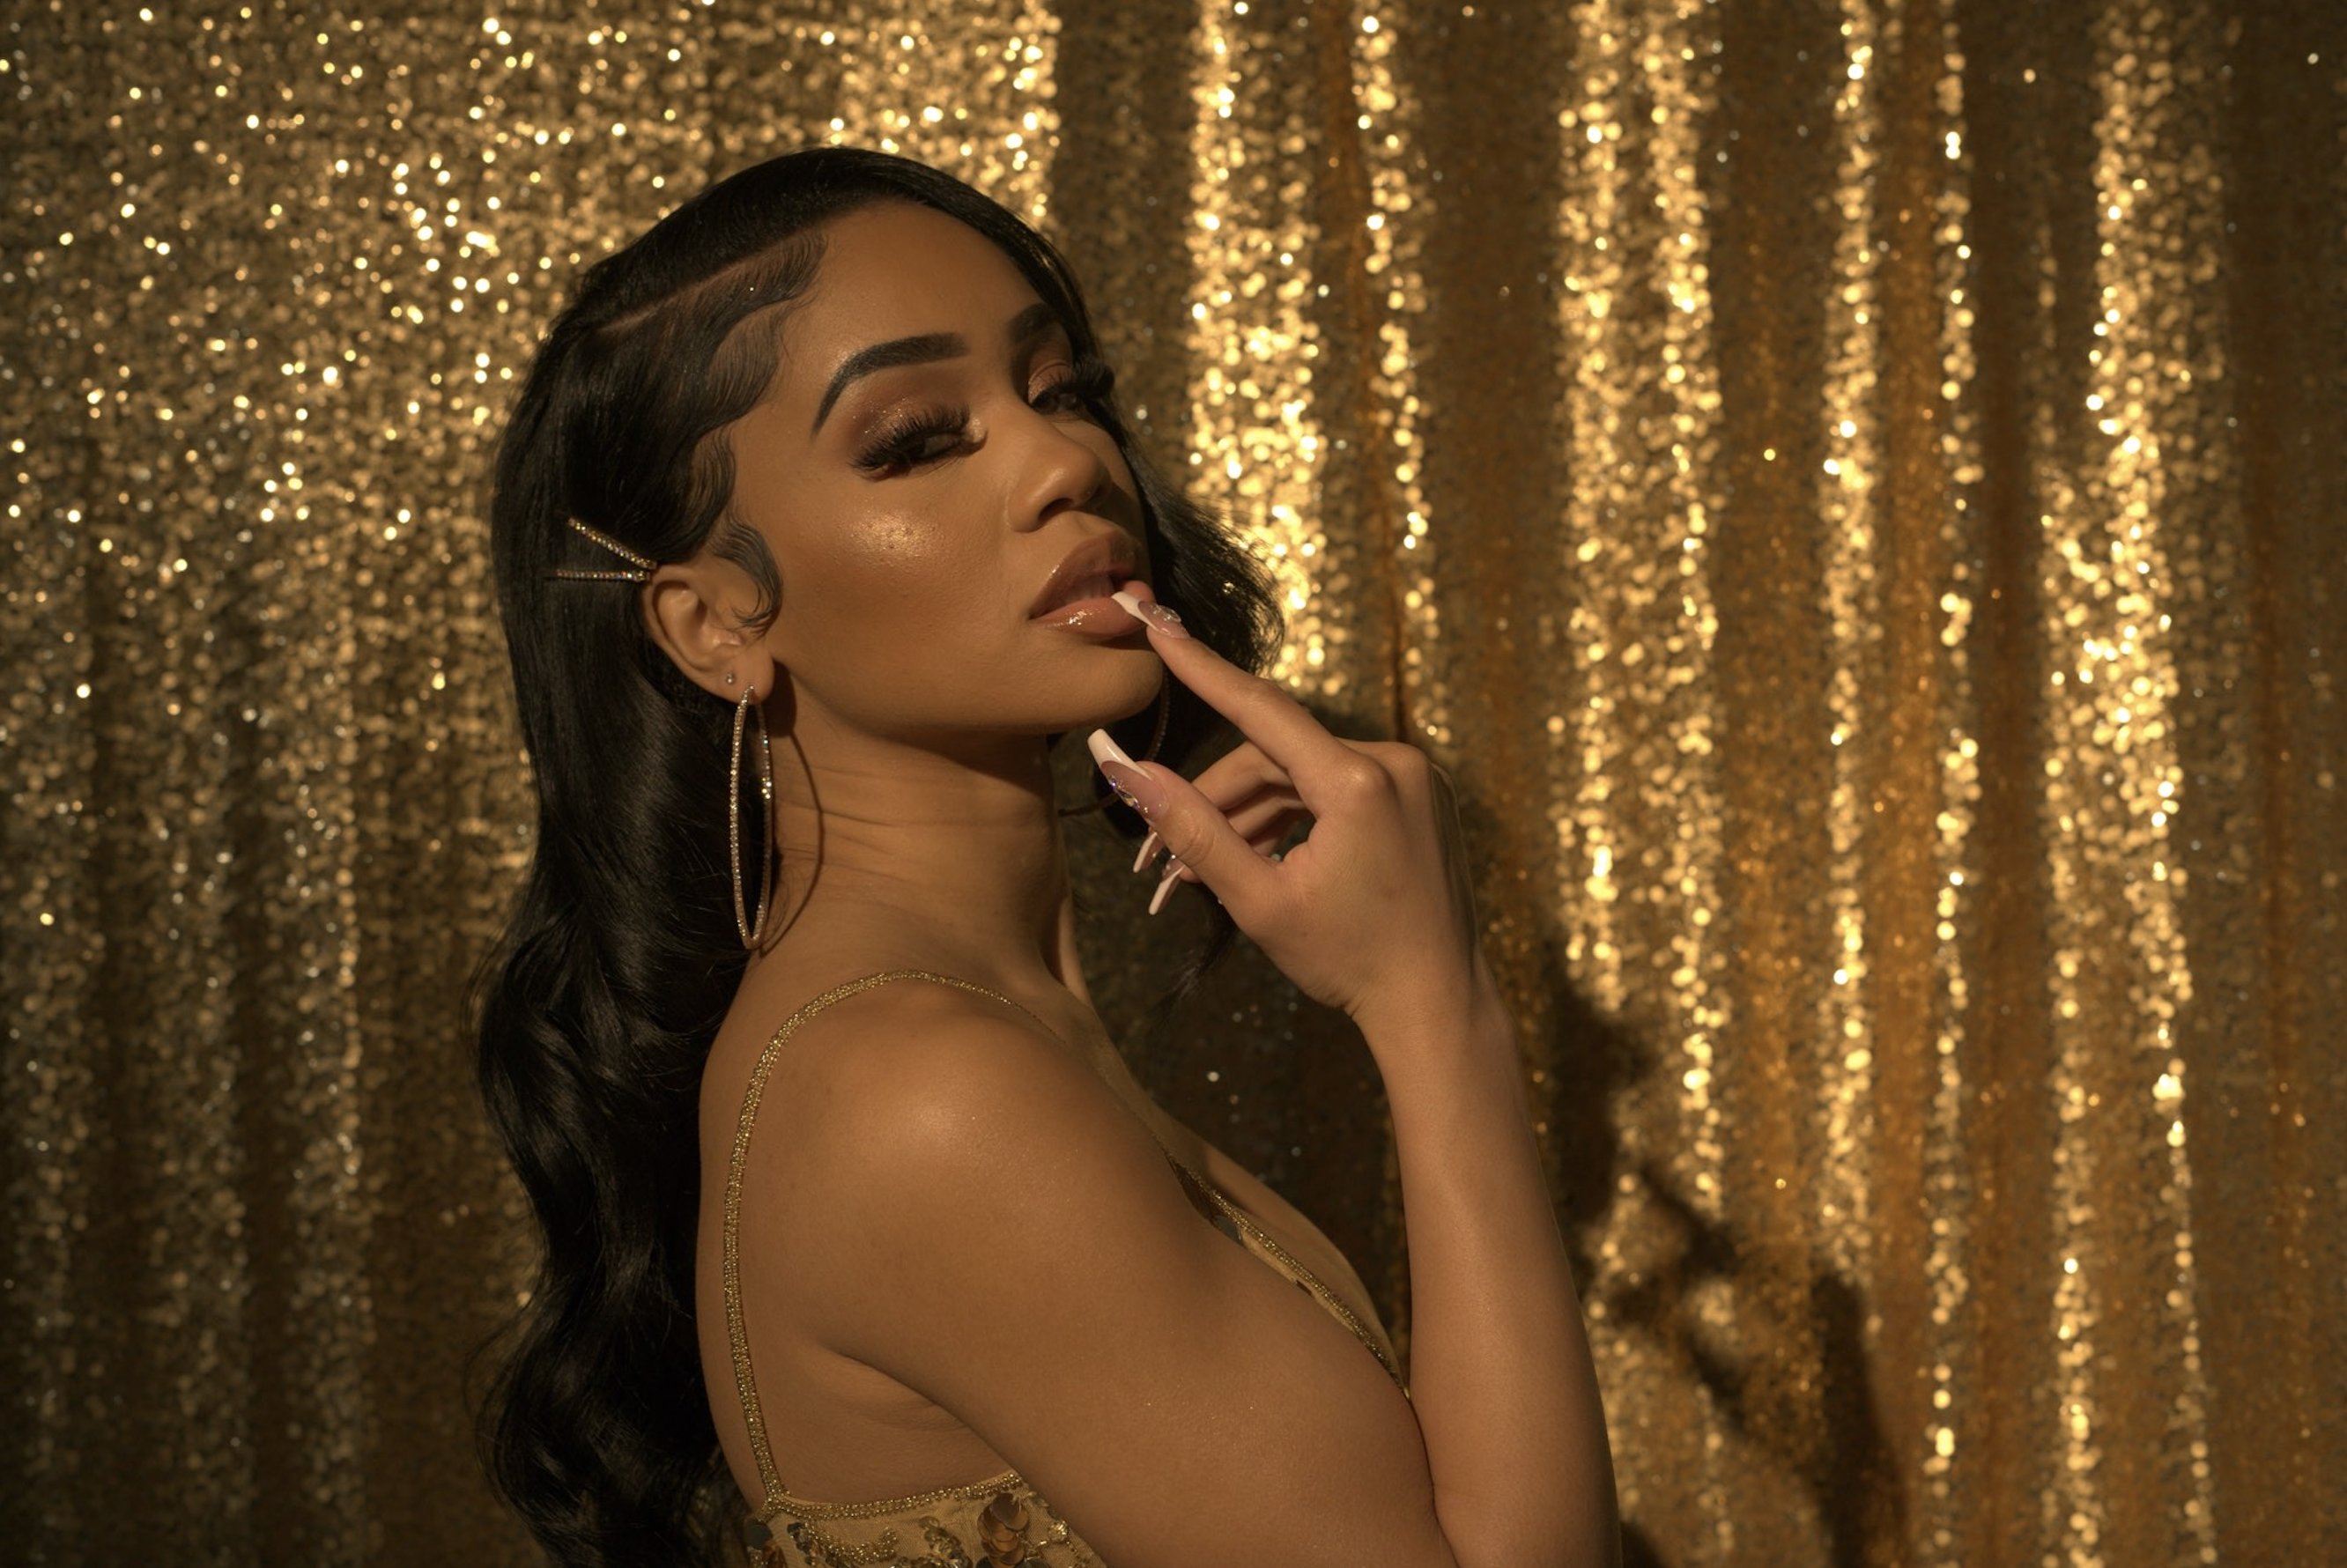 Saweetie Talks Music, Birkin Bags And What’s Next For Her